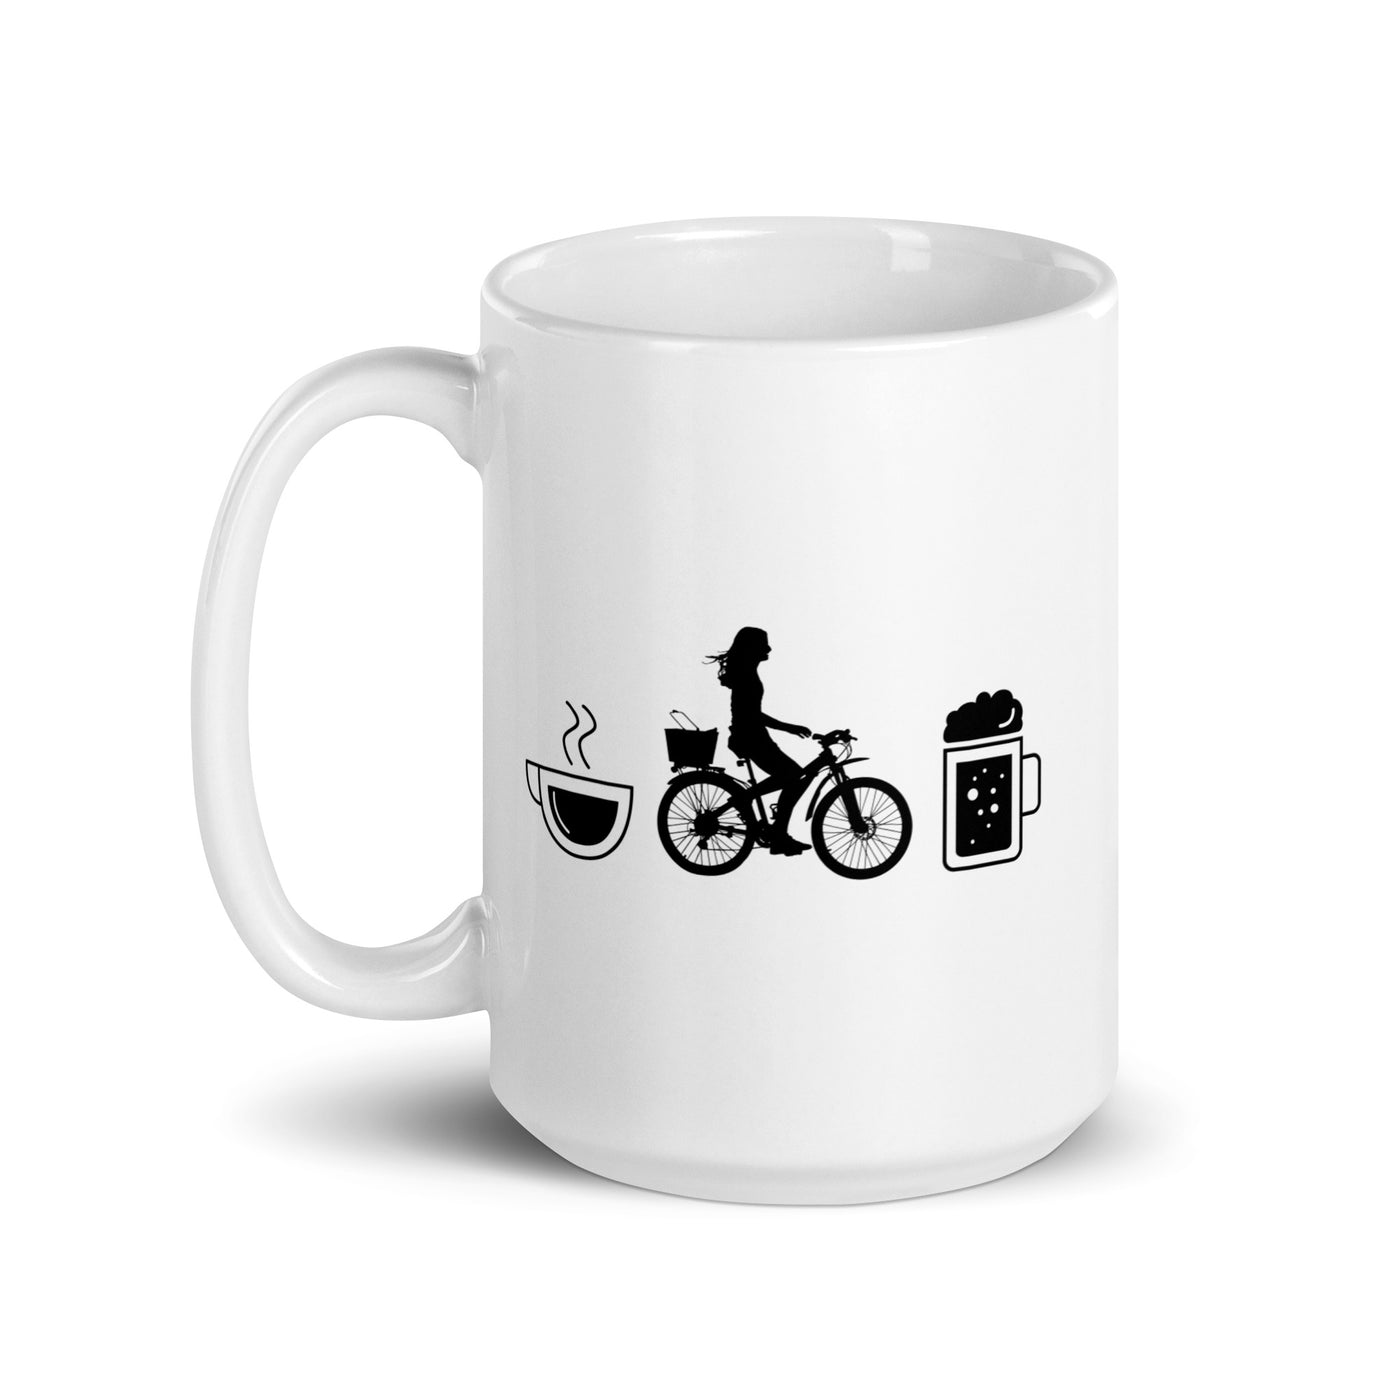 Coffee Beer And Cycling - Tasse fahrrad